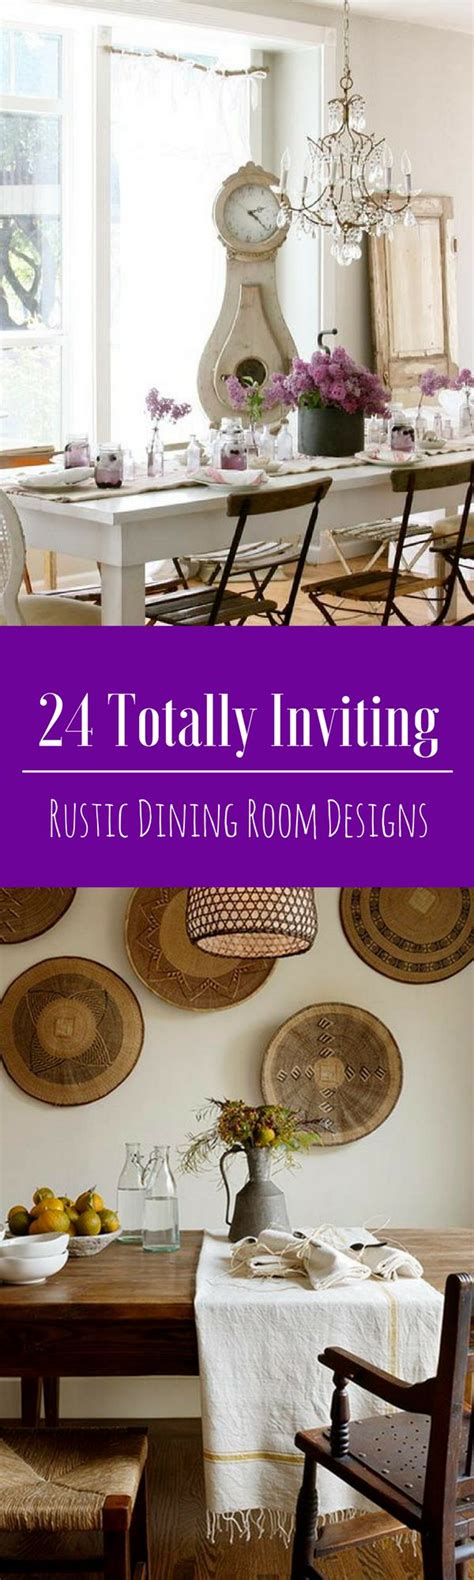 24 Totally Inviting Rustic Dining Room Designs Rustic Dining Room